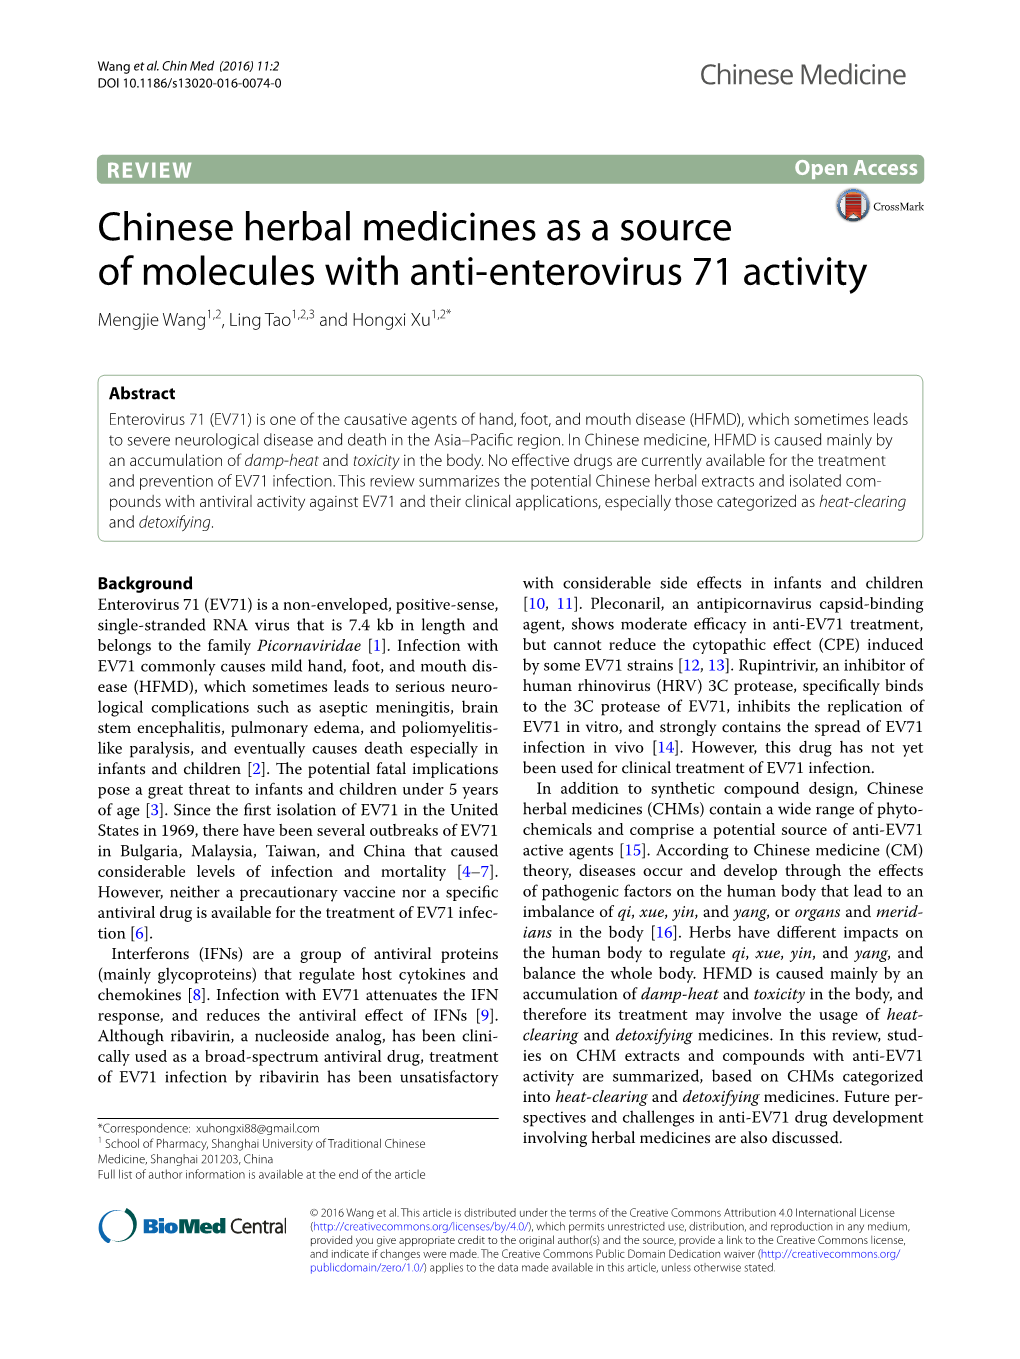 Chinese Herbal Medicines As a Source of Molecules with Anti-Enterovirus